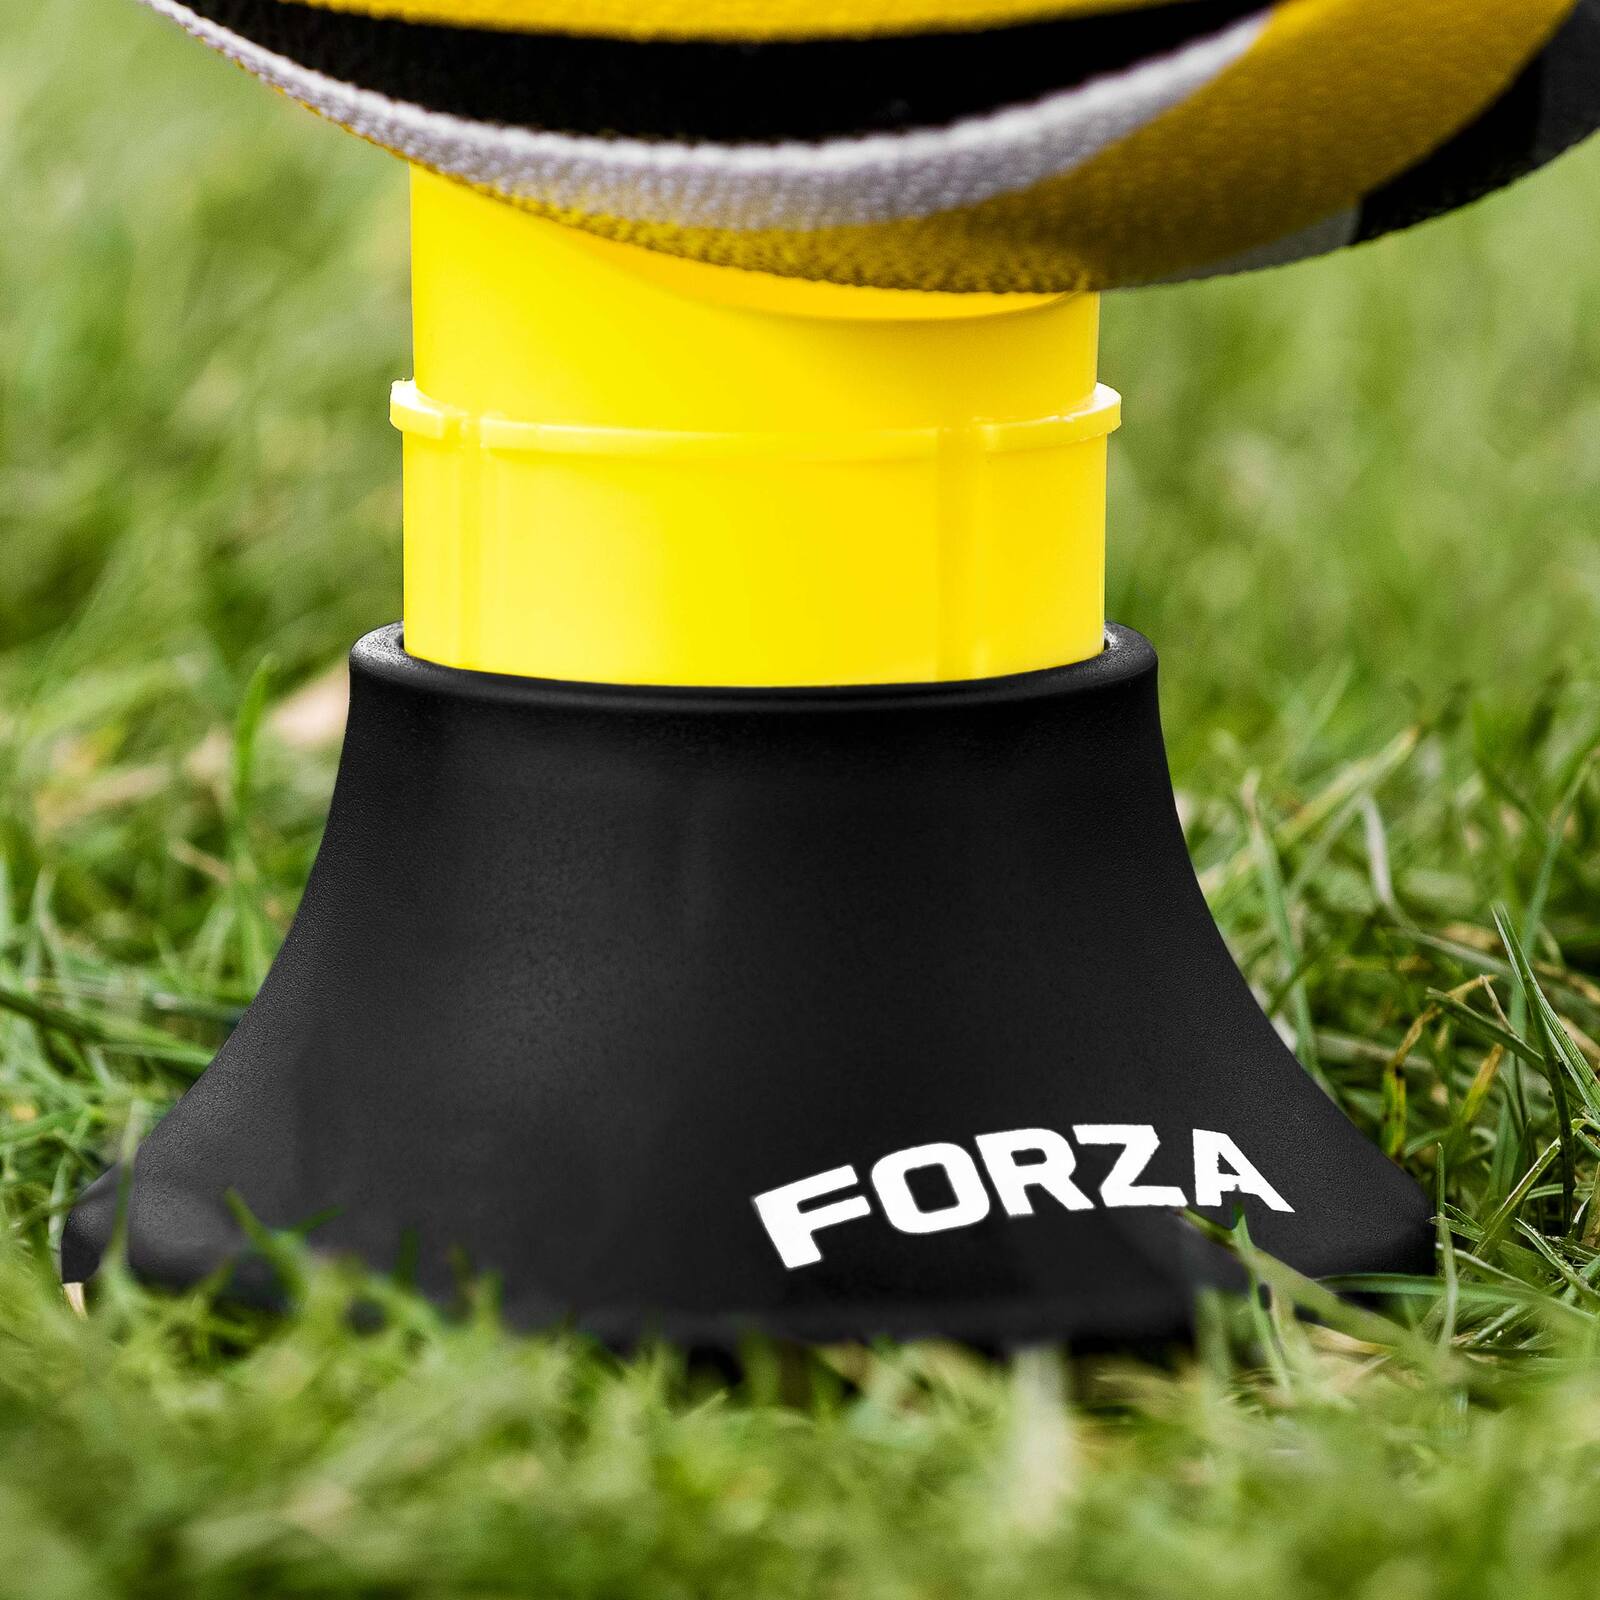 FORZA Extendable Rugby Kicking Tee